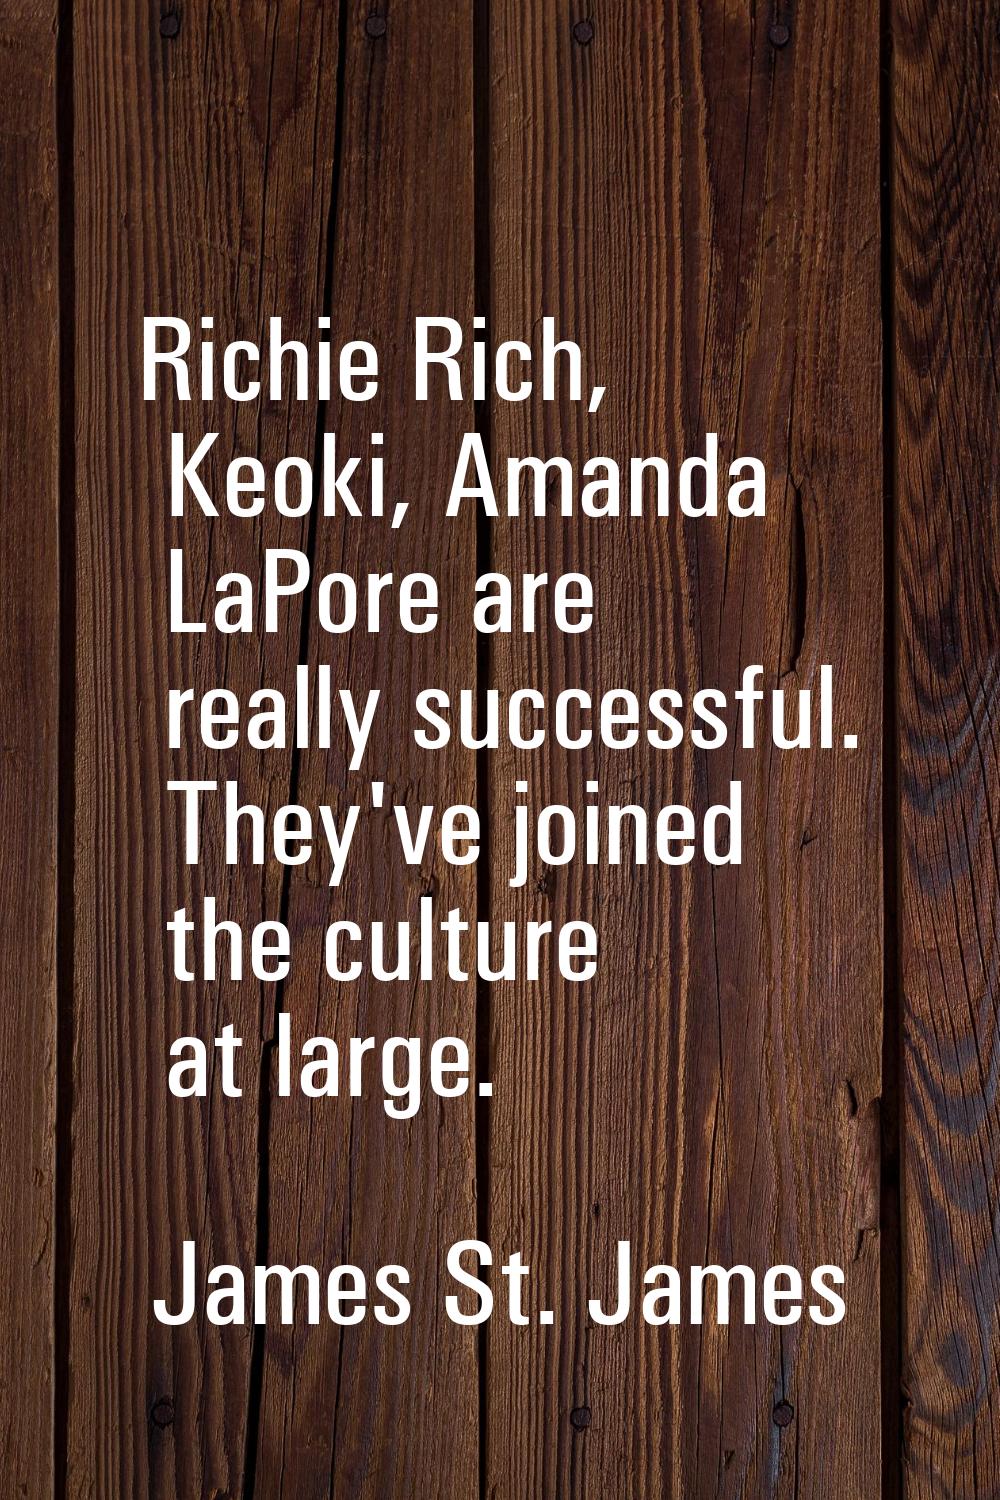 Richie Rich, Keoki, Amanda LaPore are really successful. They've joined the culture at large.